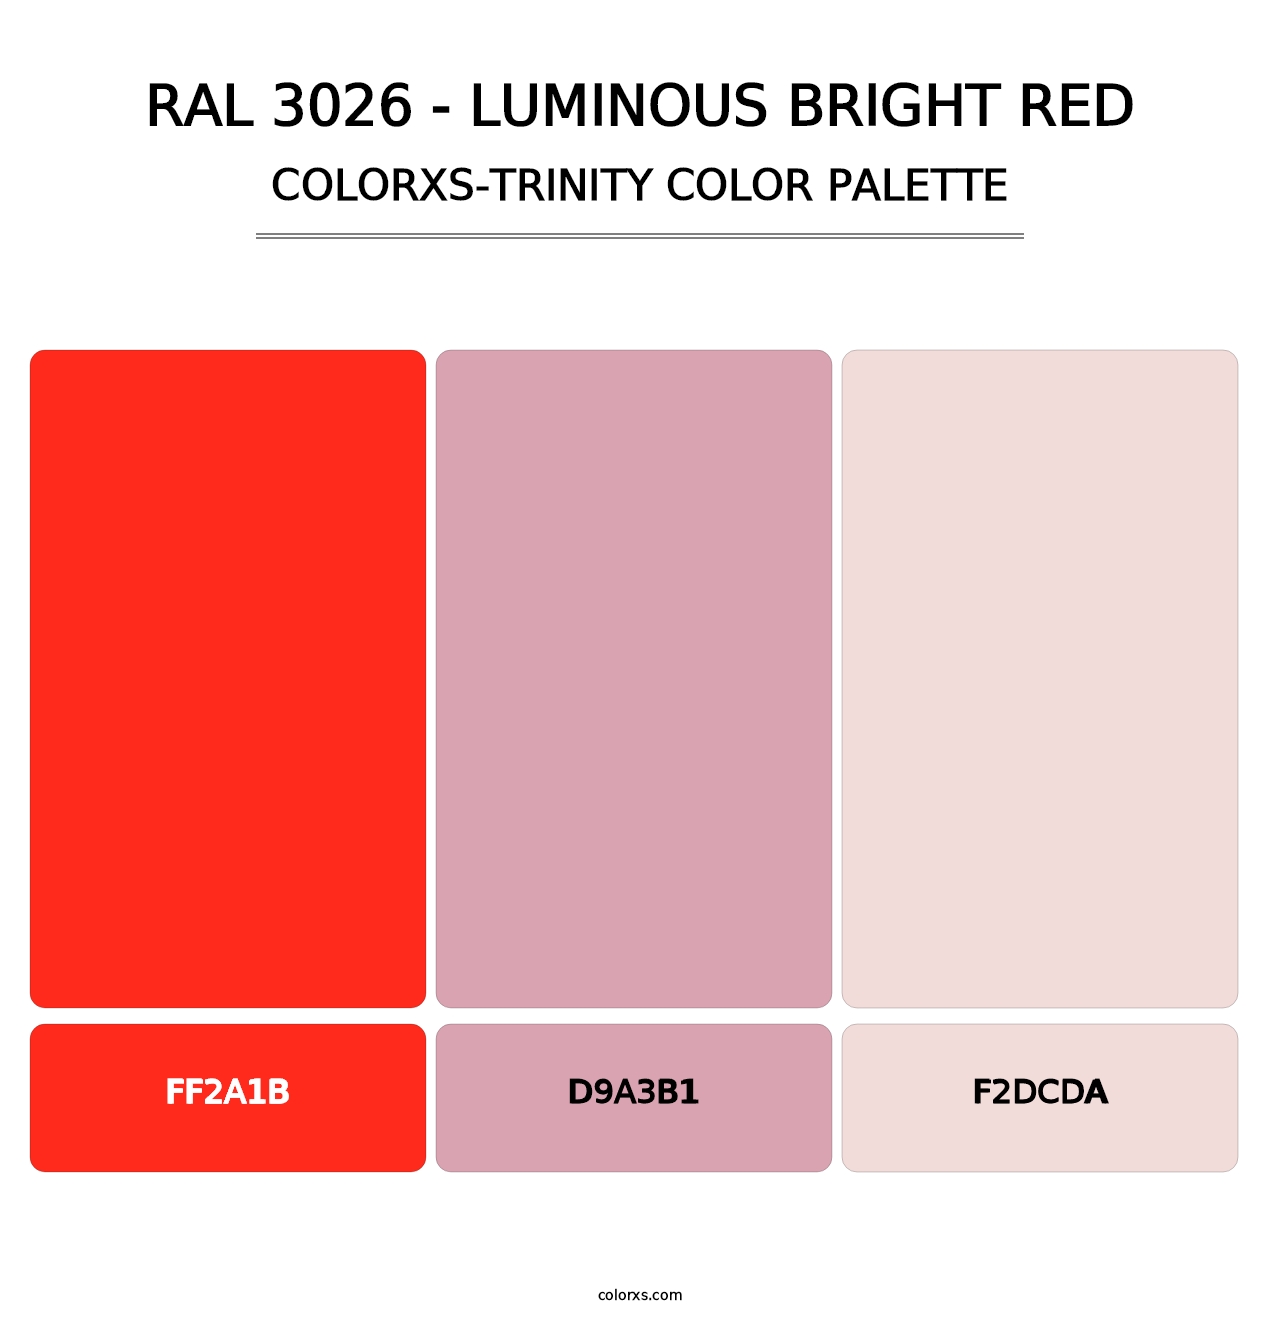 RAL 3026 - Luminous Bright Red - Colorxs Trinity Palette